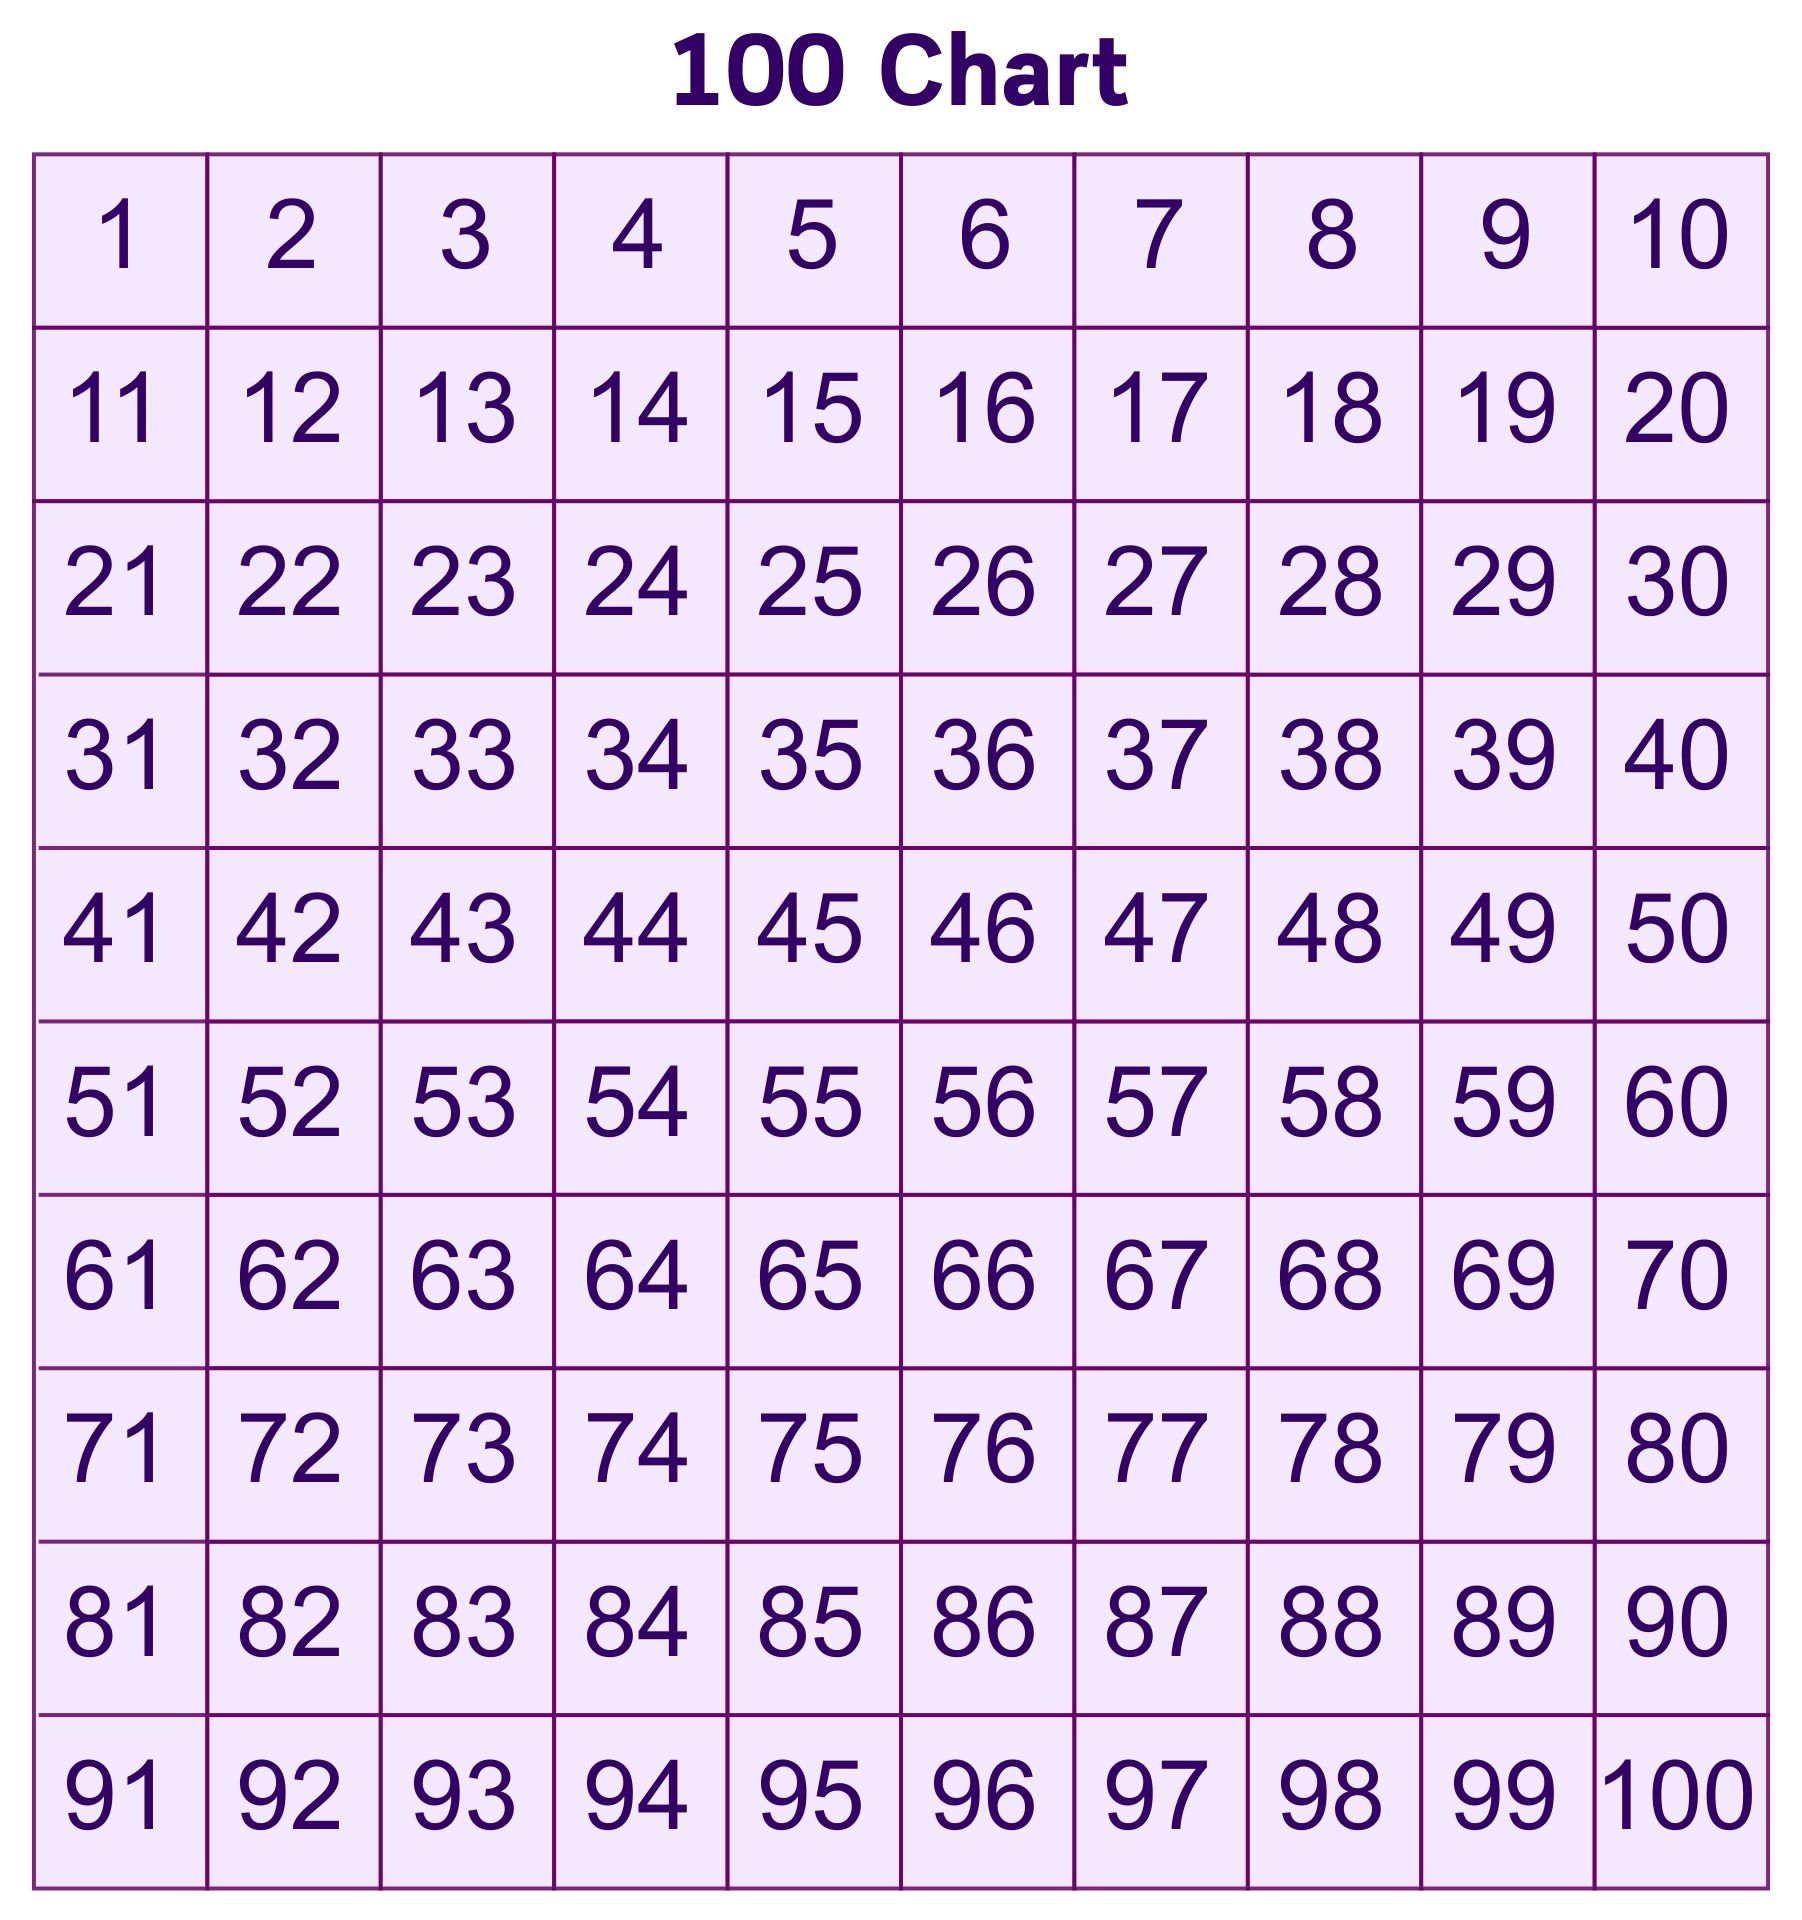 5-best-images-of-100-chart-printable-printable-blank-100-hundreds